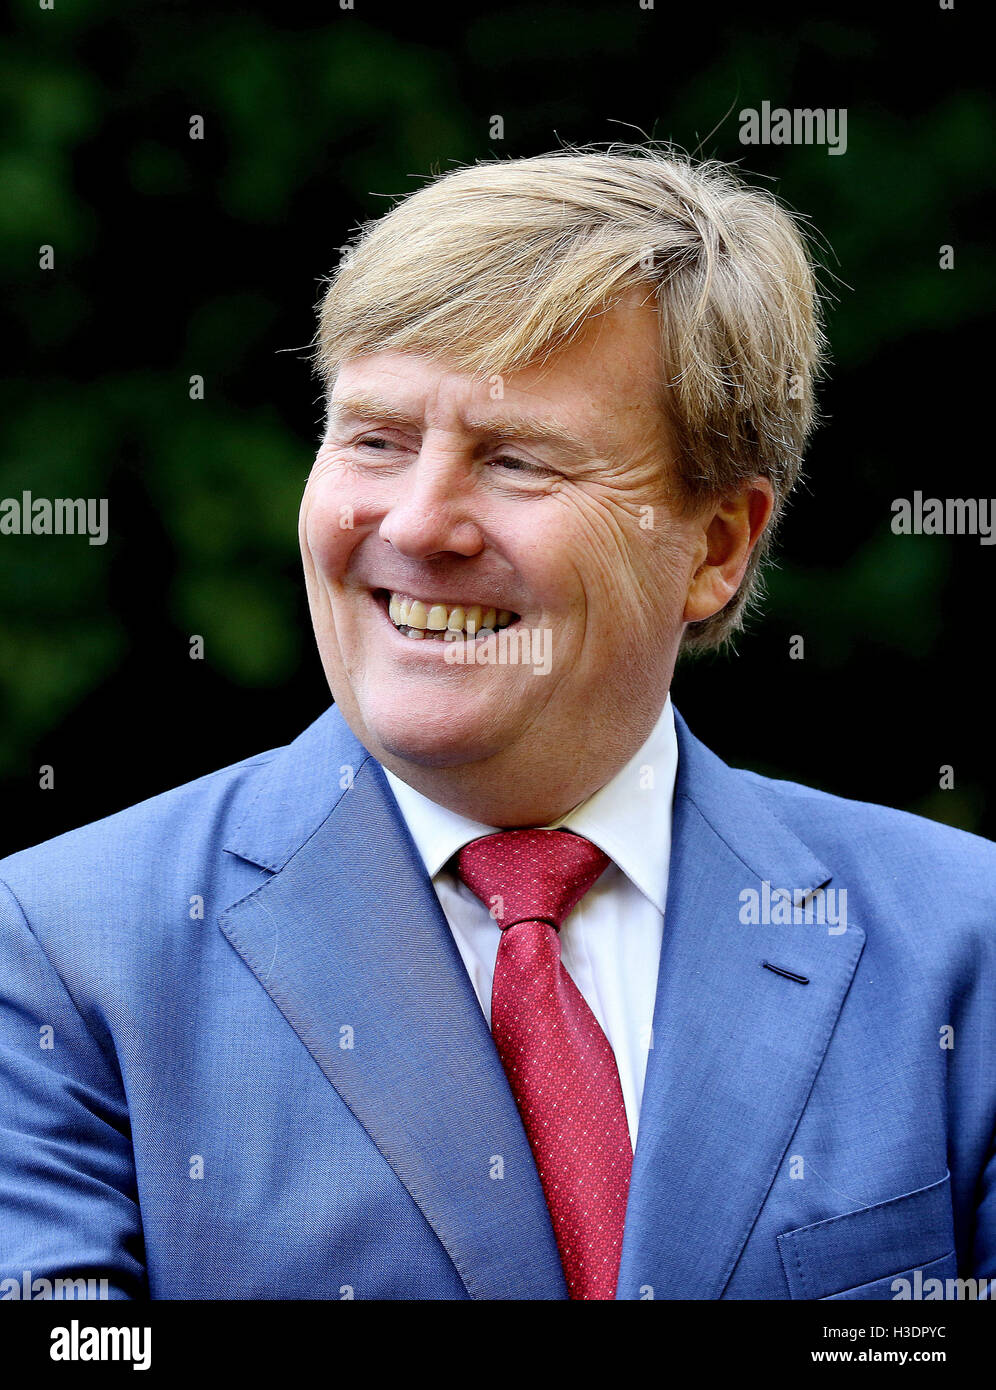 Deurningen, The Netherlands. 6th Oct, 2016. King Willem-Alexander of The Netherlands visits the Twente Safety Campus in Deurningen, The Netherlands, 6 October 2016. At the campus school children and the elderly how to react in dangerous situations. Photo: RPE/Albert Nieboer/ /POINT DE VUE OUT/dpa/Alamy Live News Stock Photo